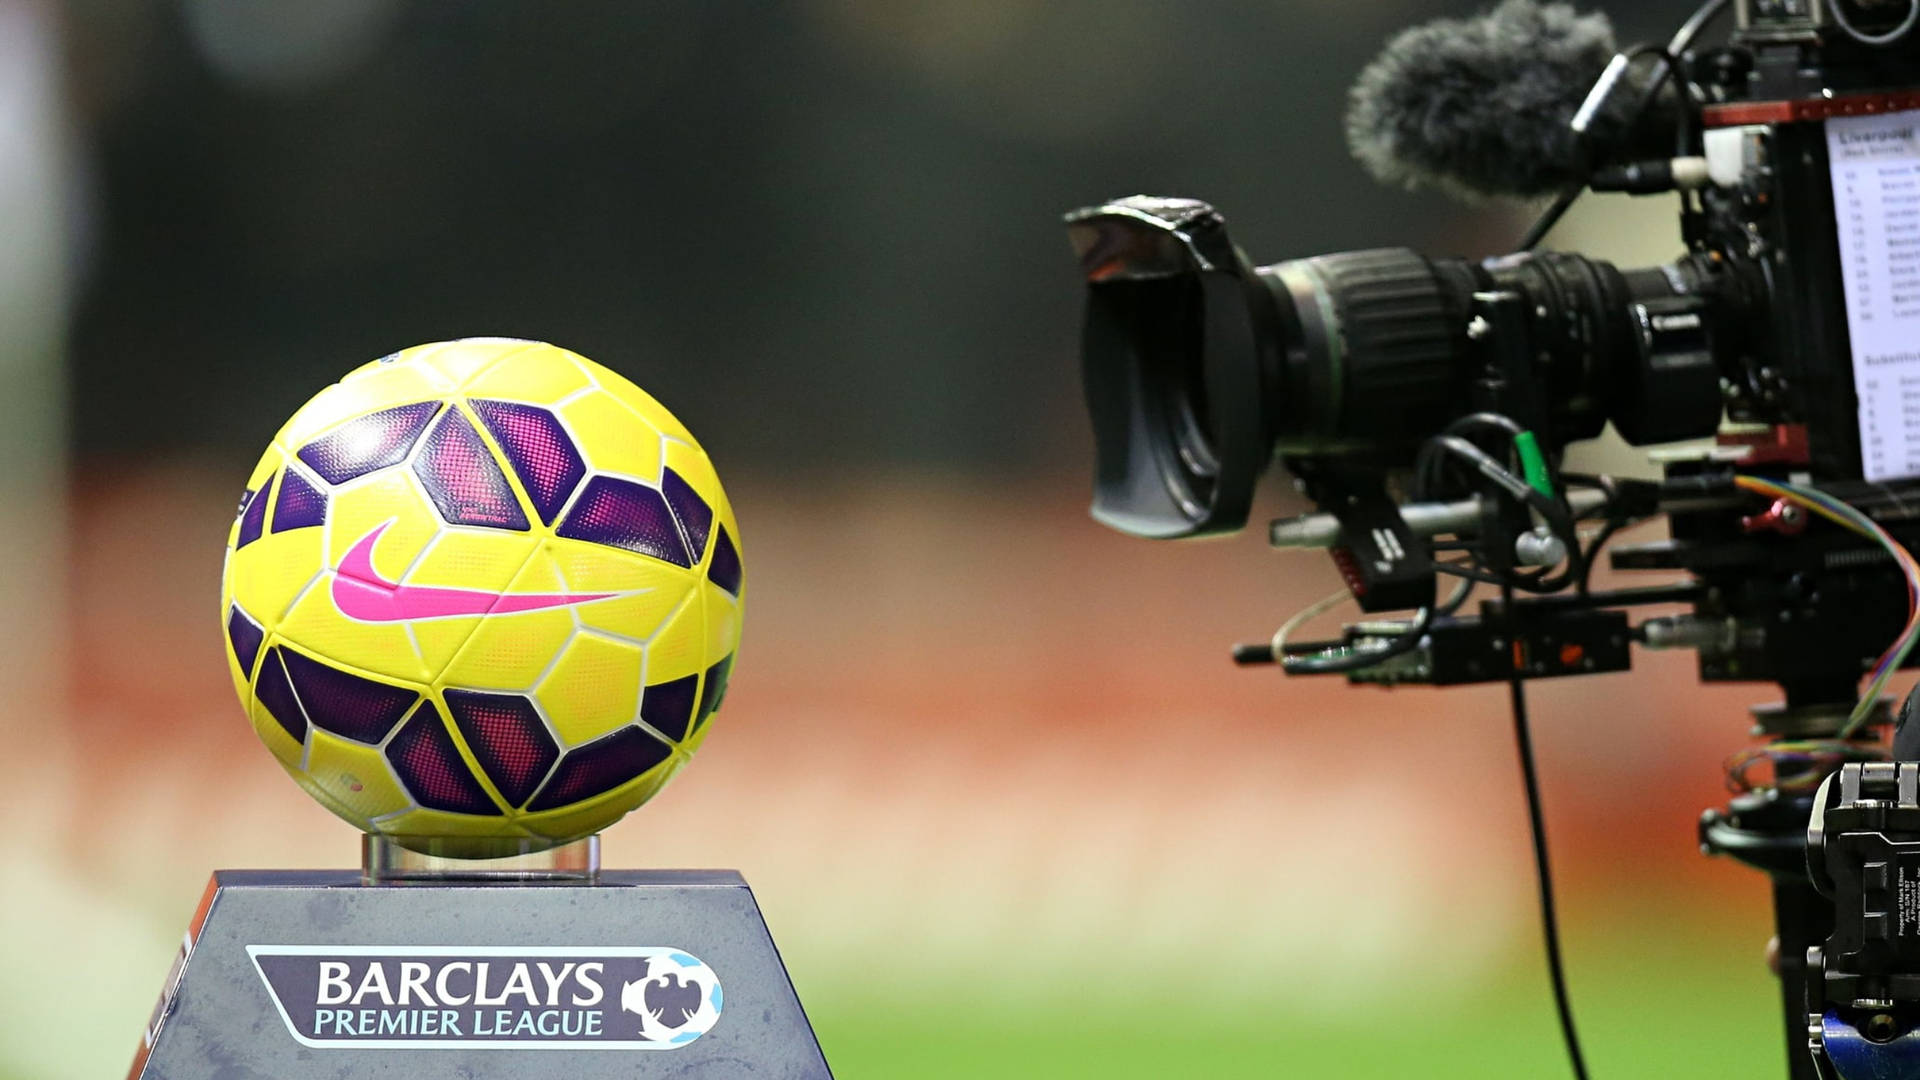 Premier League Soccer Ball With Camera Background